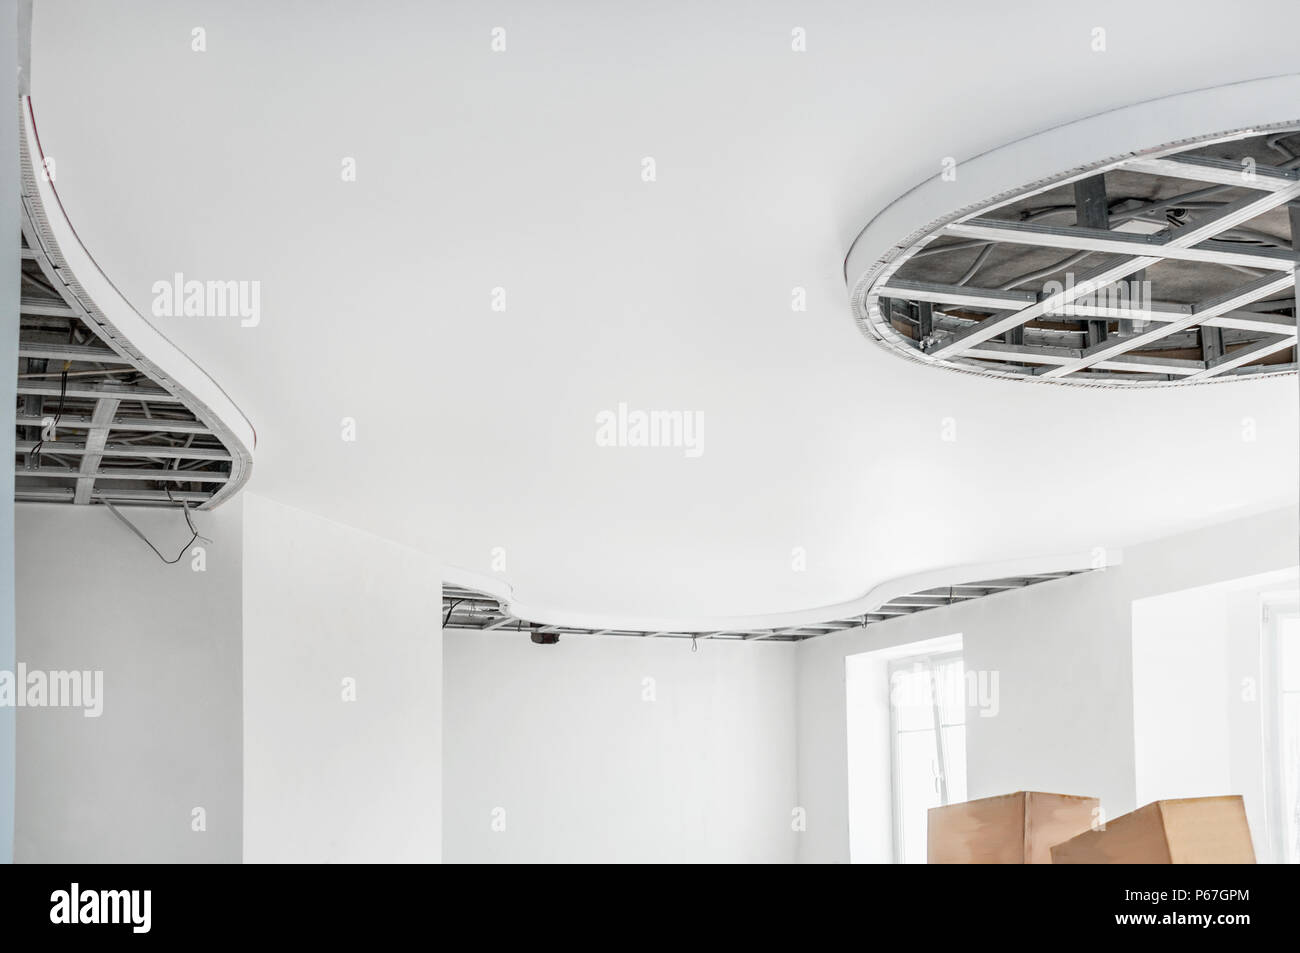 Installation Of Plasterboard Ceiling The Repair Of An